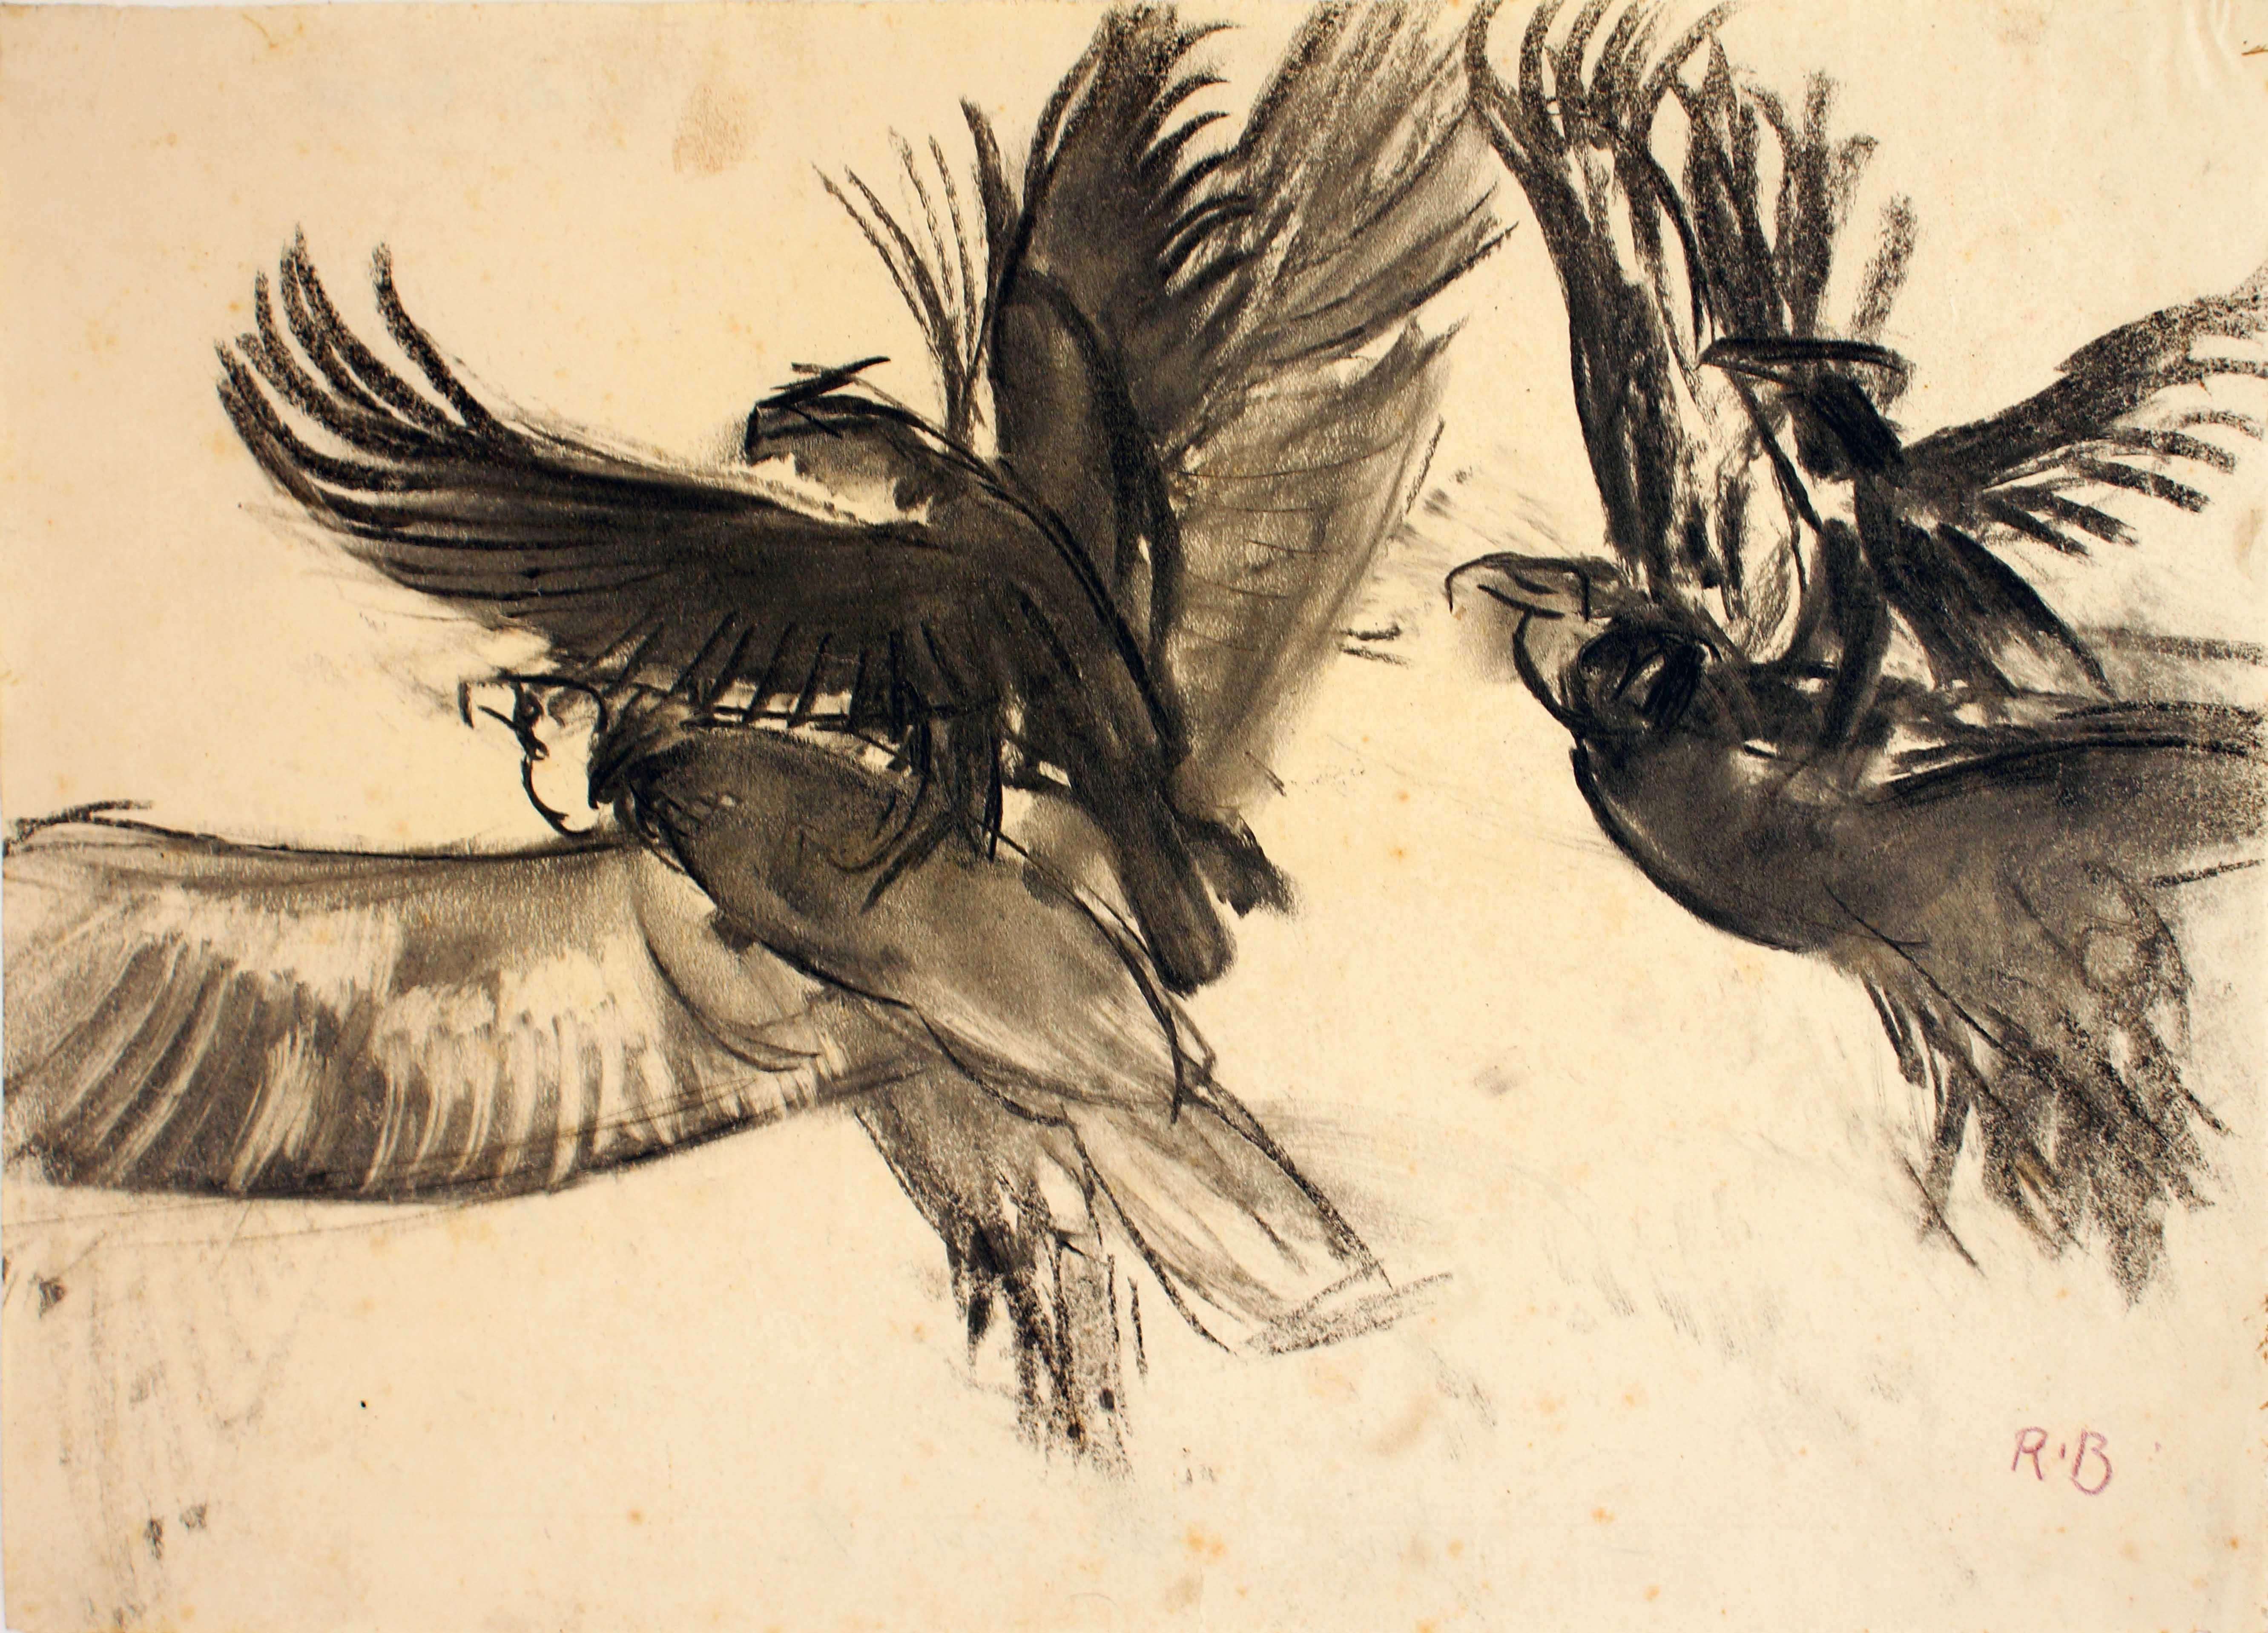 Vultures - Original Charcoal Drawing by Renato Brozzi - Early 1900